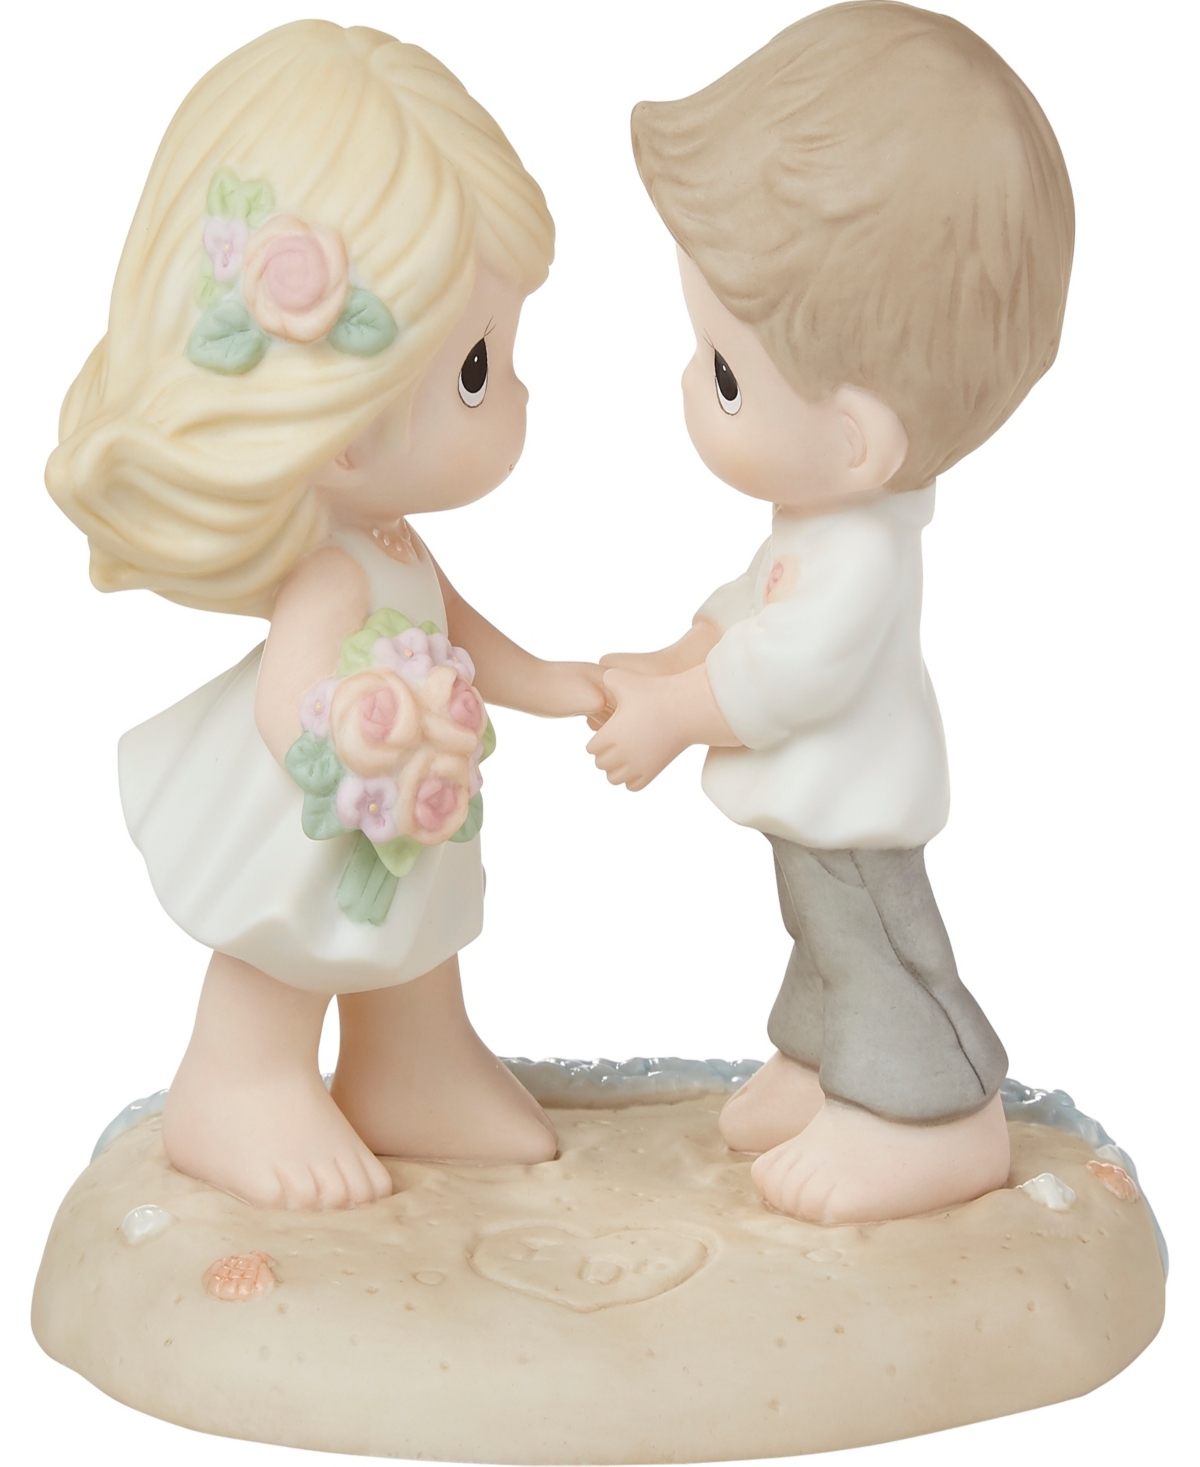 Precious Moments 222030 To Have And To Hold Bisque Porcelain Figurine In Multicolored